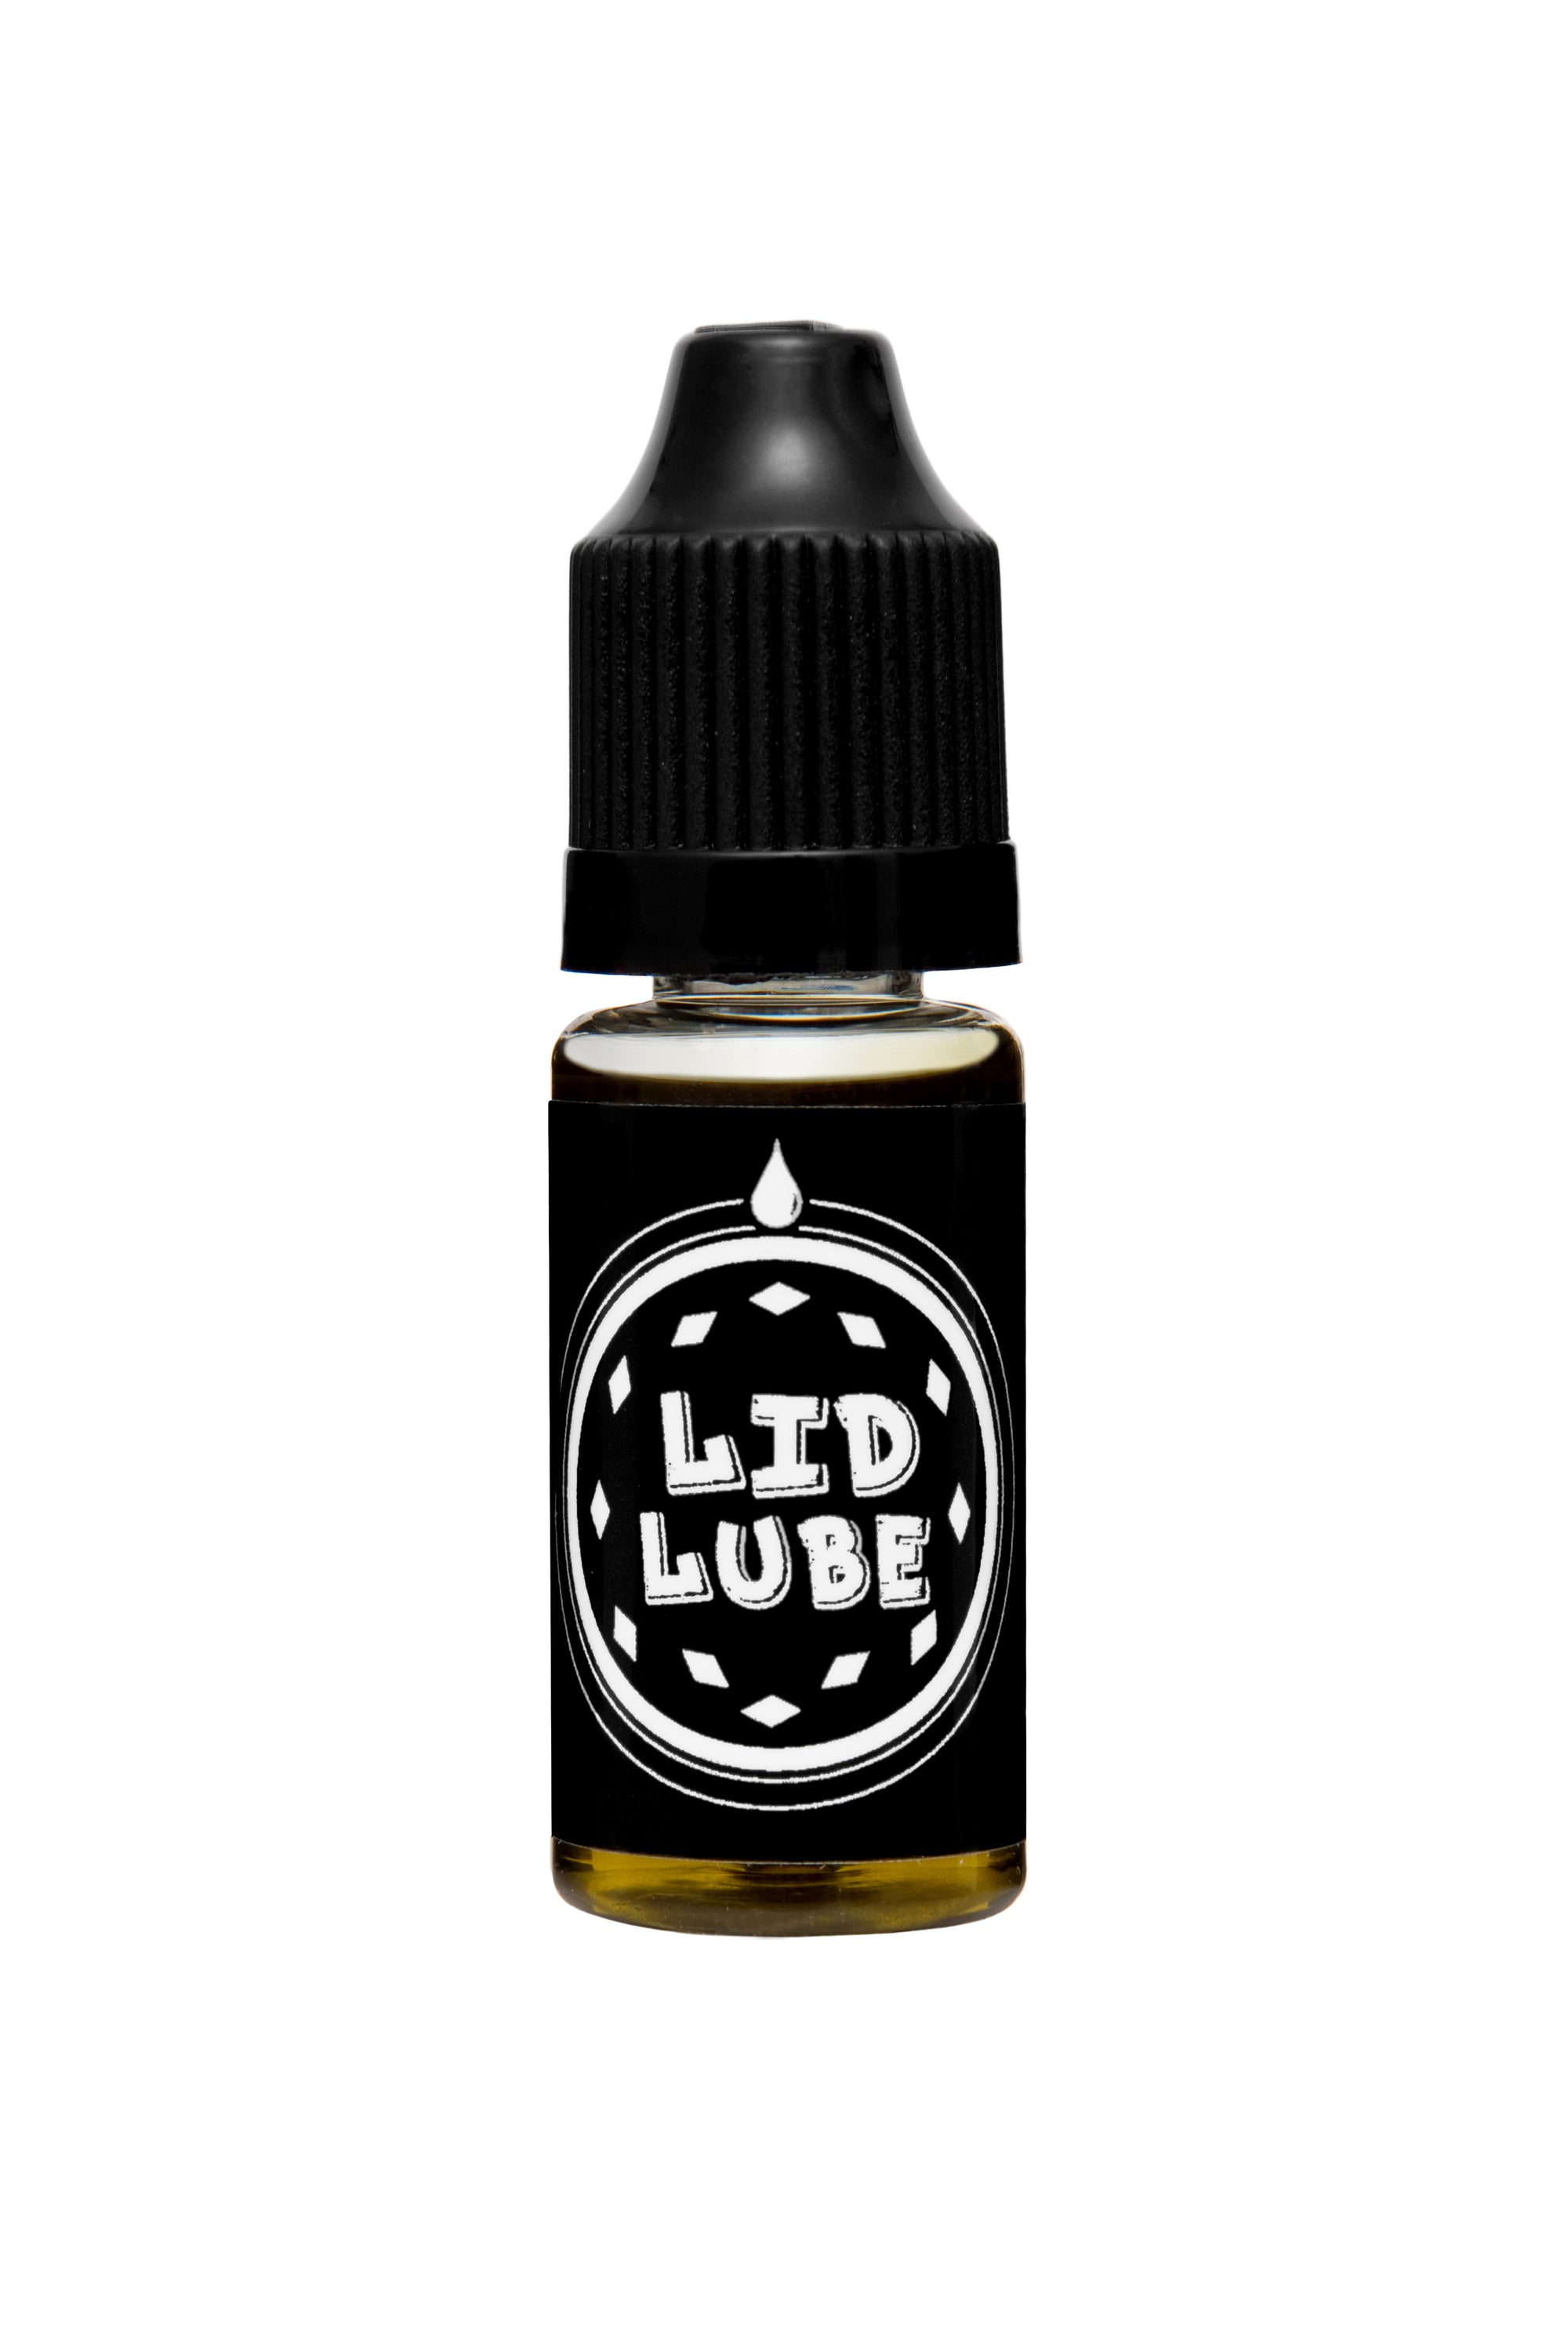 Lid Lube Natural Hemp Oil Lube | How To Unstick A Grinder | How To Fix A Stuck Grinder Lid